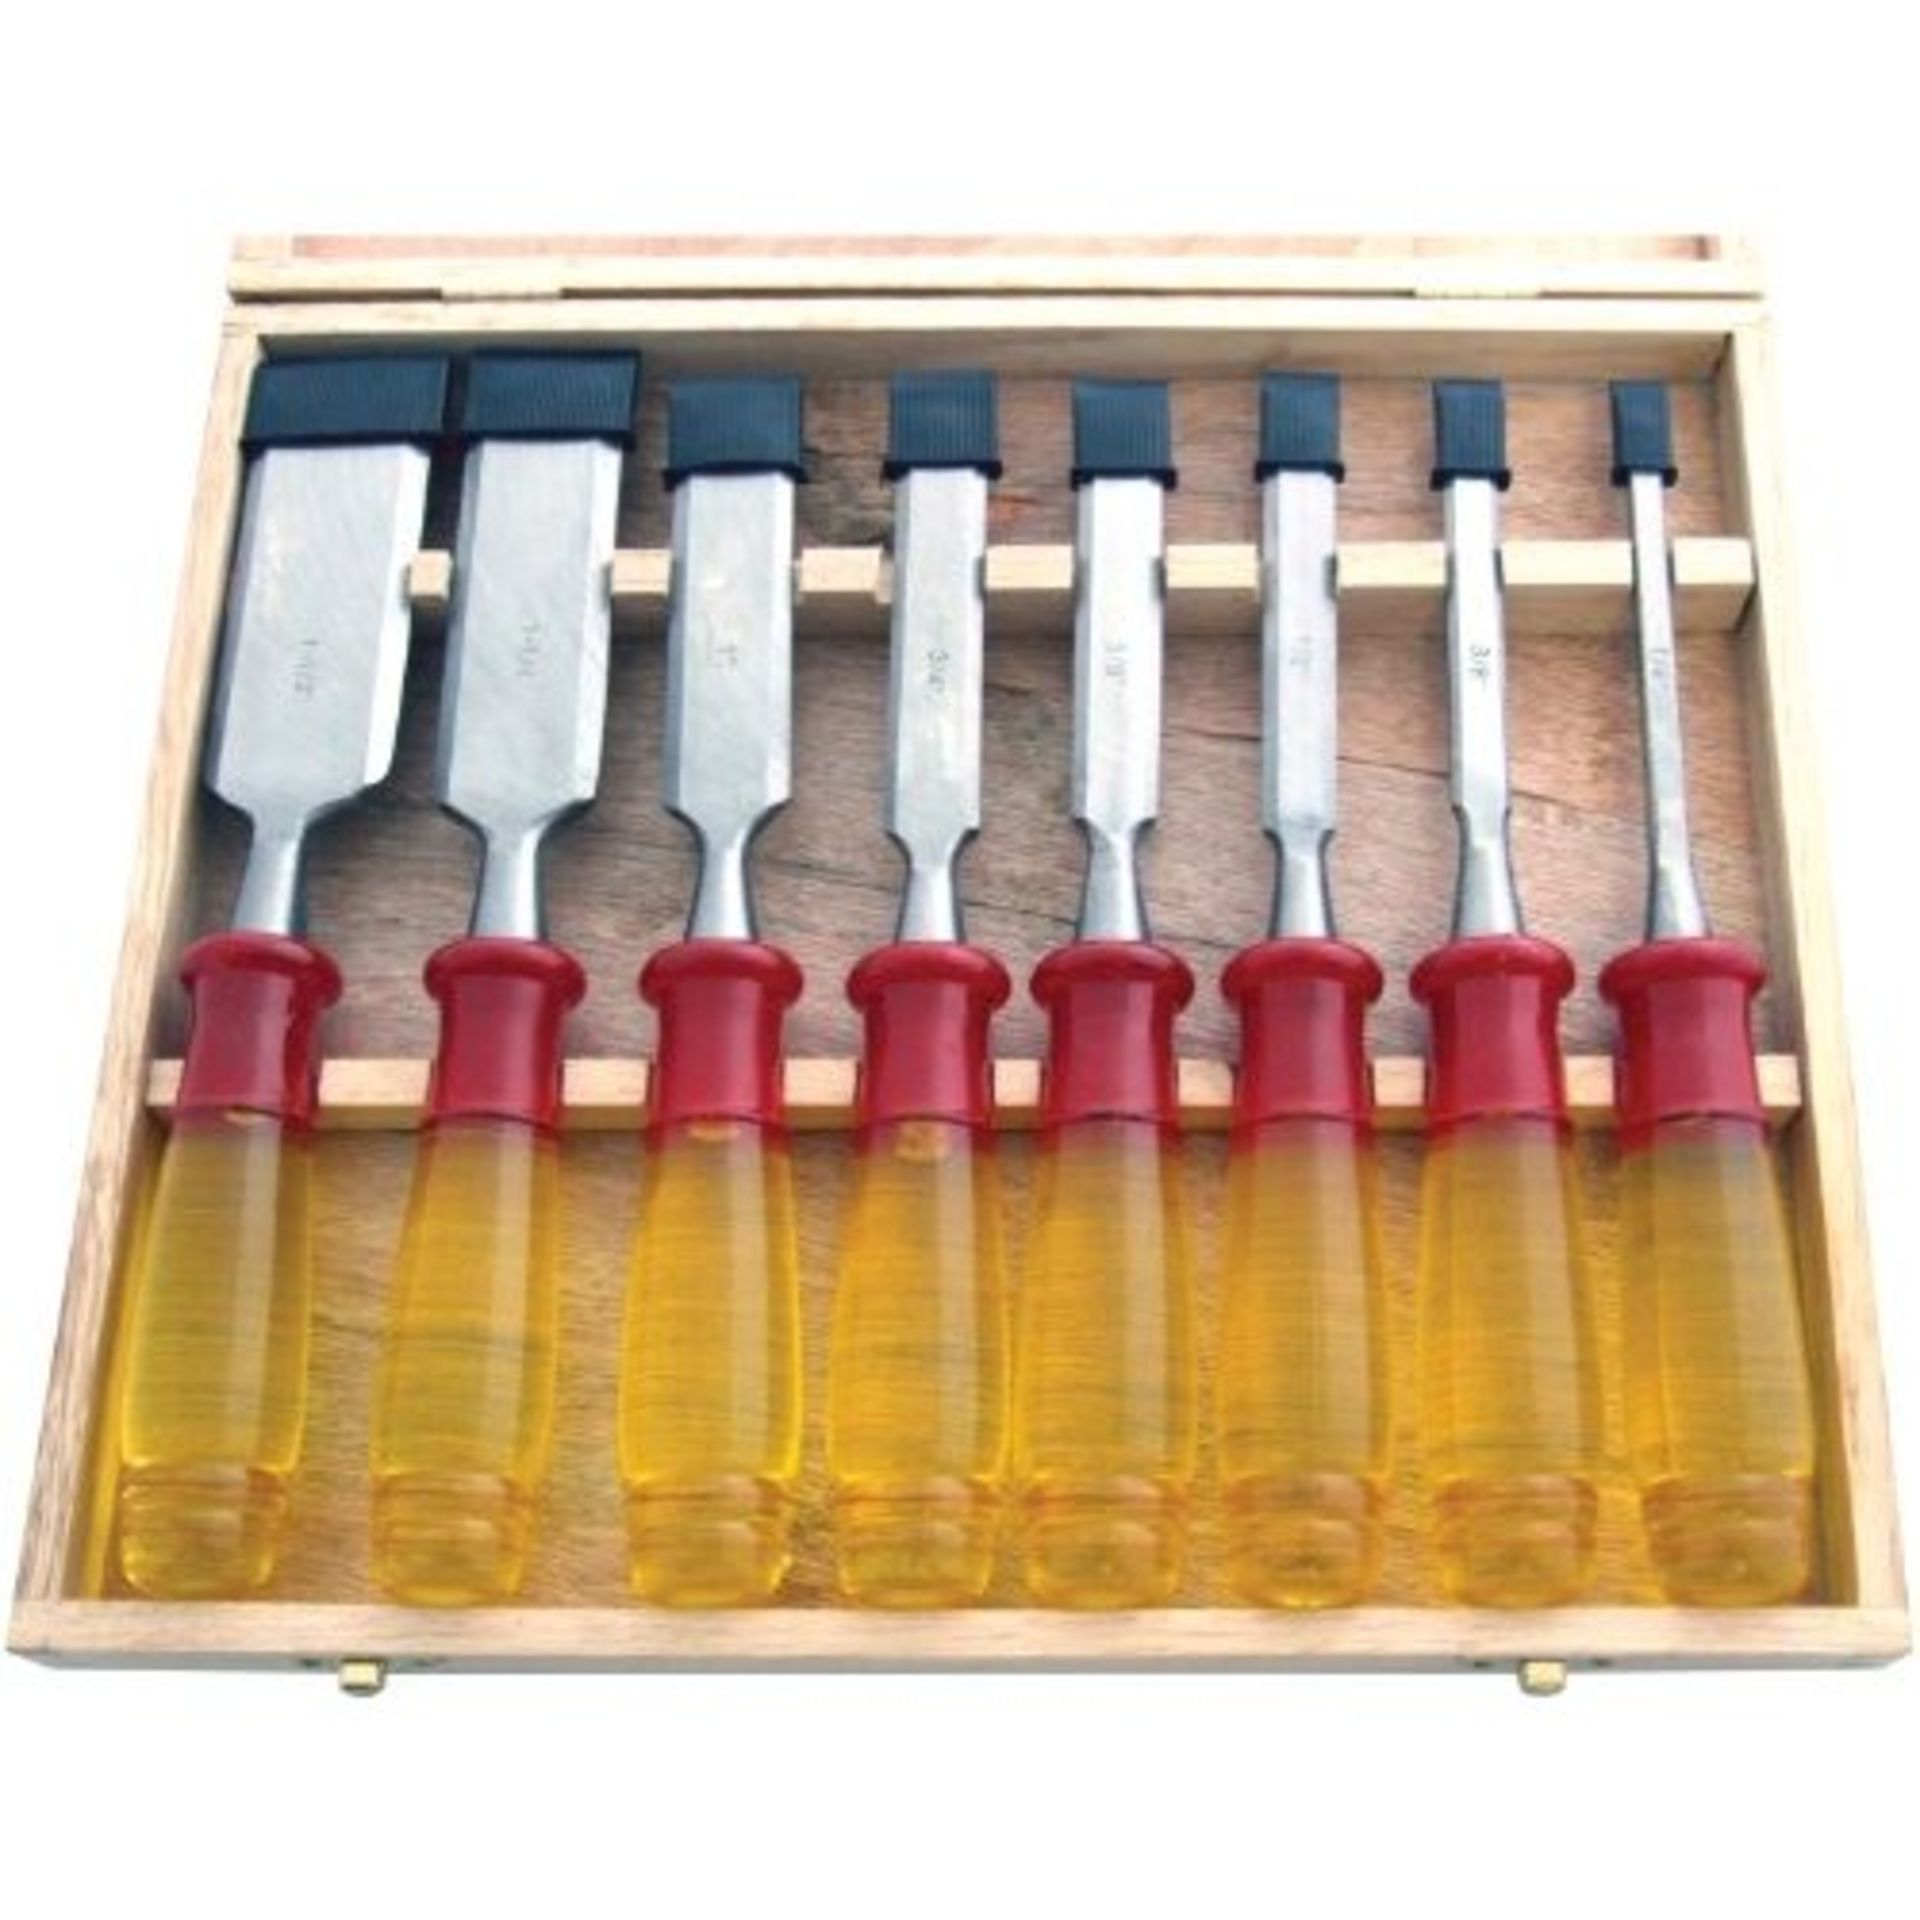 V *TRADE QTY* Brand New Eight Piece Professional Chisel Set With Wooden Storage Case X 10 YOUR BID